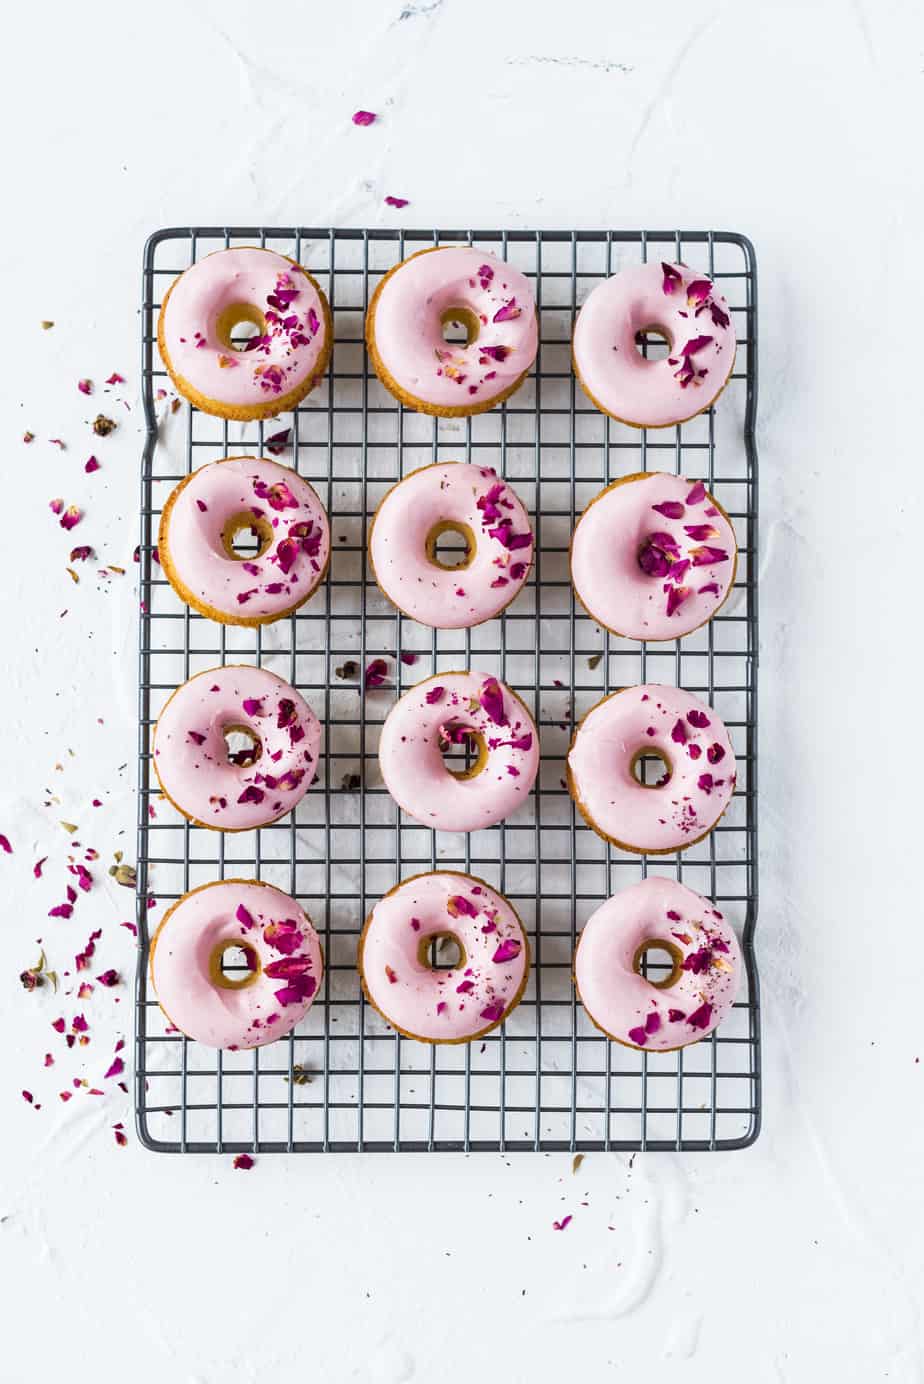 Glazed pink doughnuts on a cooling wrack.